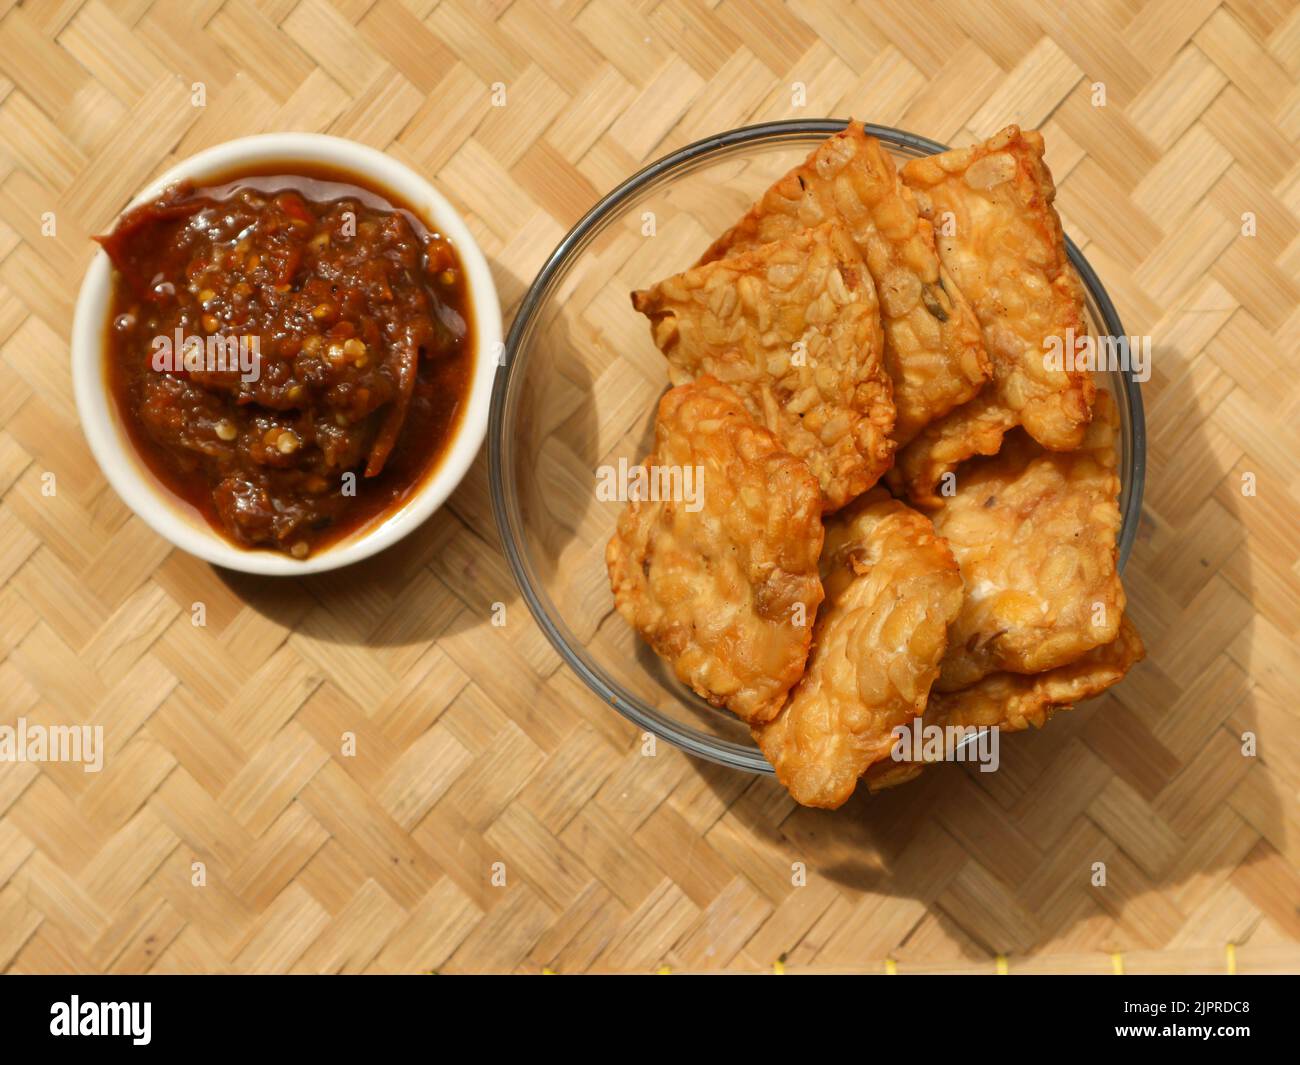 Delicious fried tempeh served with chili sauce Stock Photo